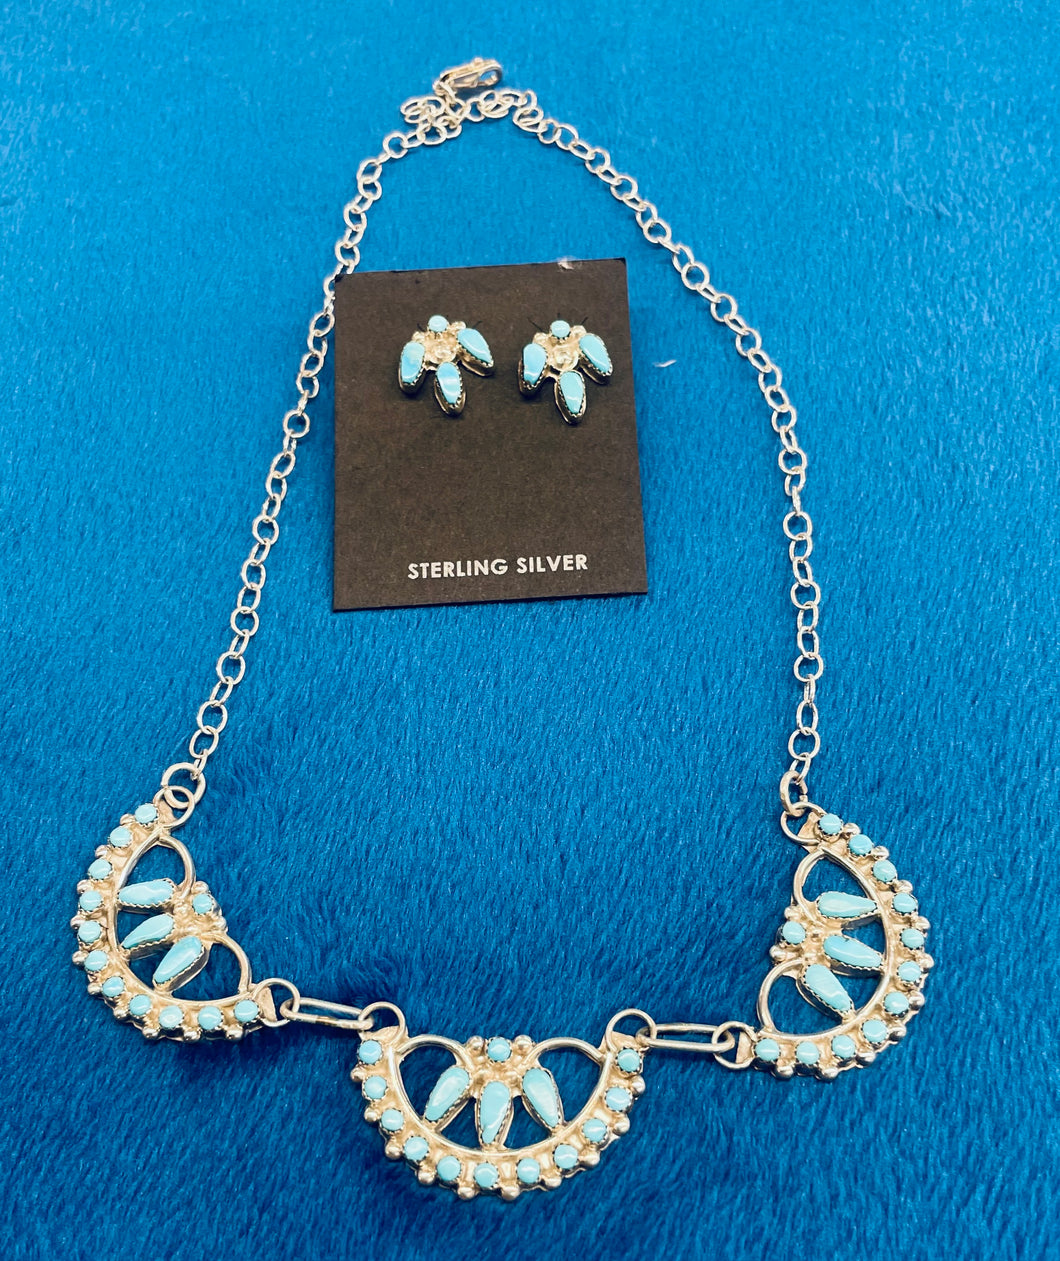 Silver and Turquoise Neckalce with Matching Earrings